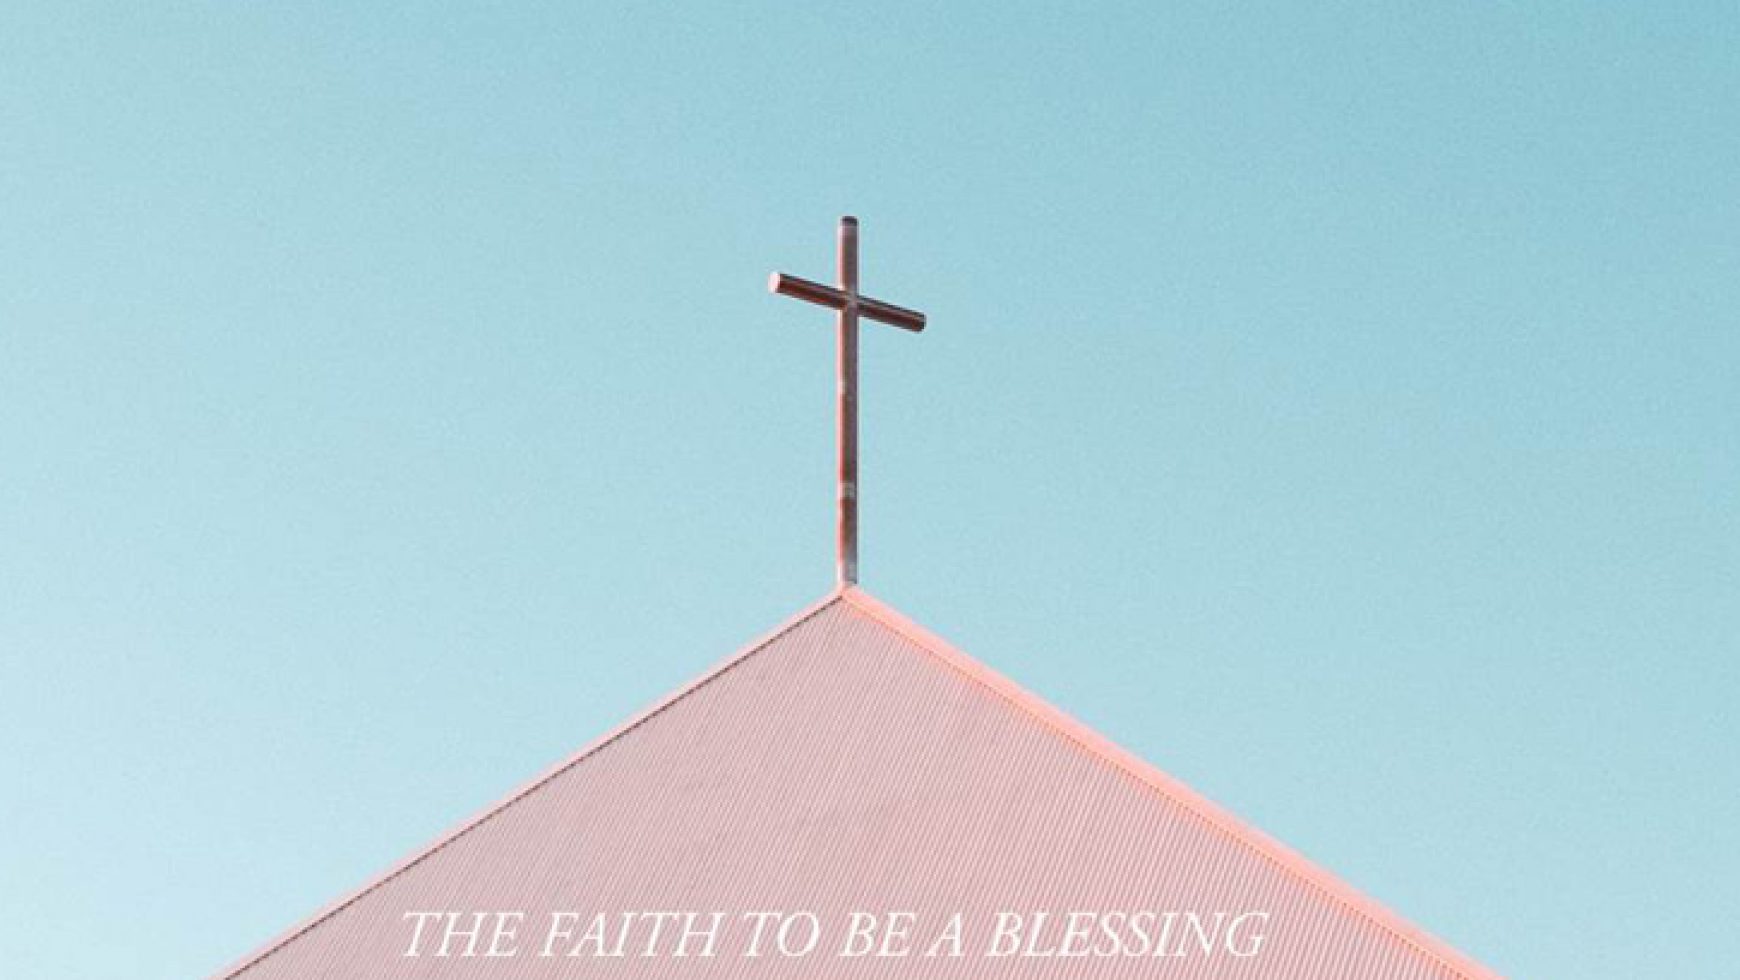 The Faith to be a Blessing